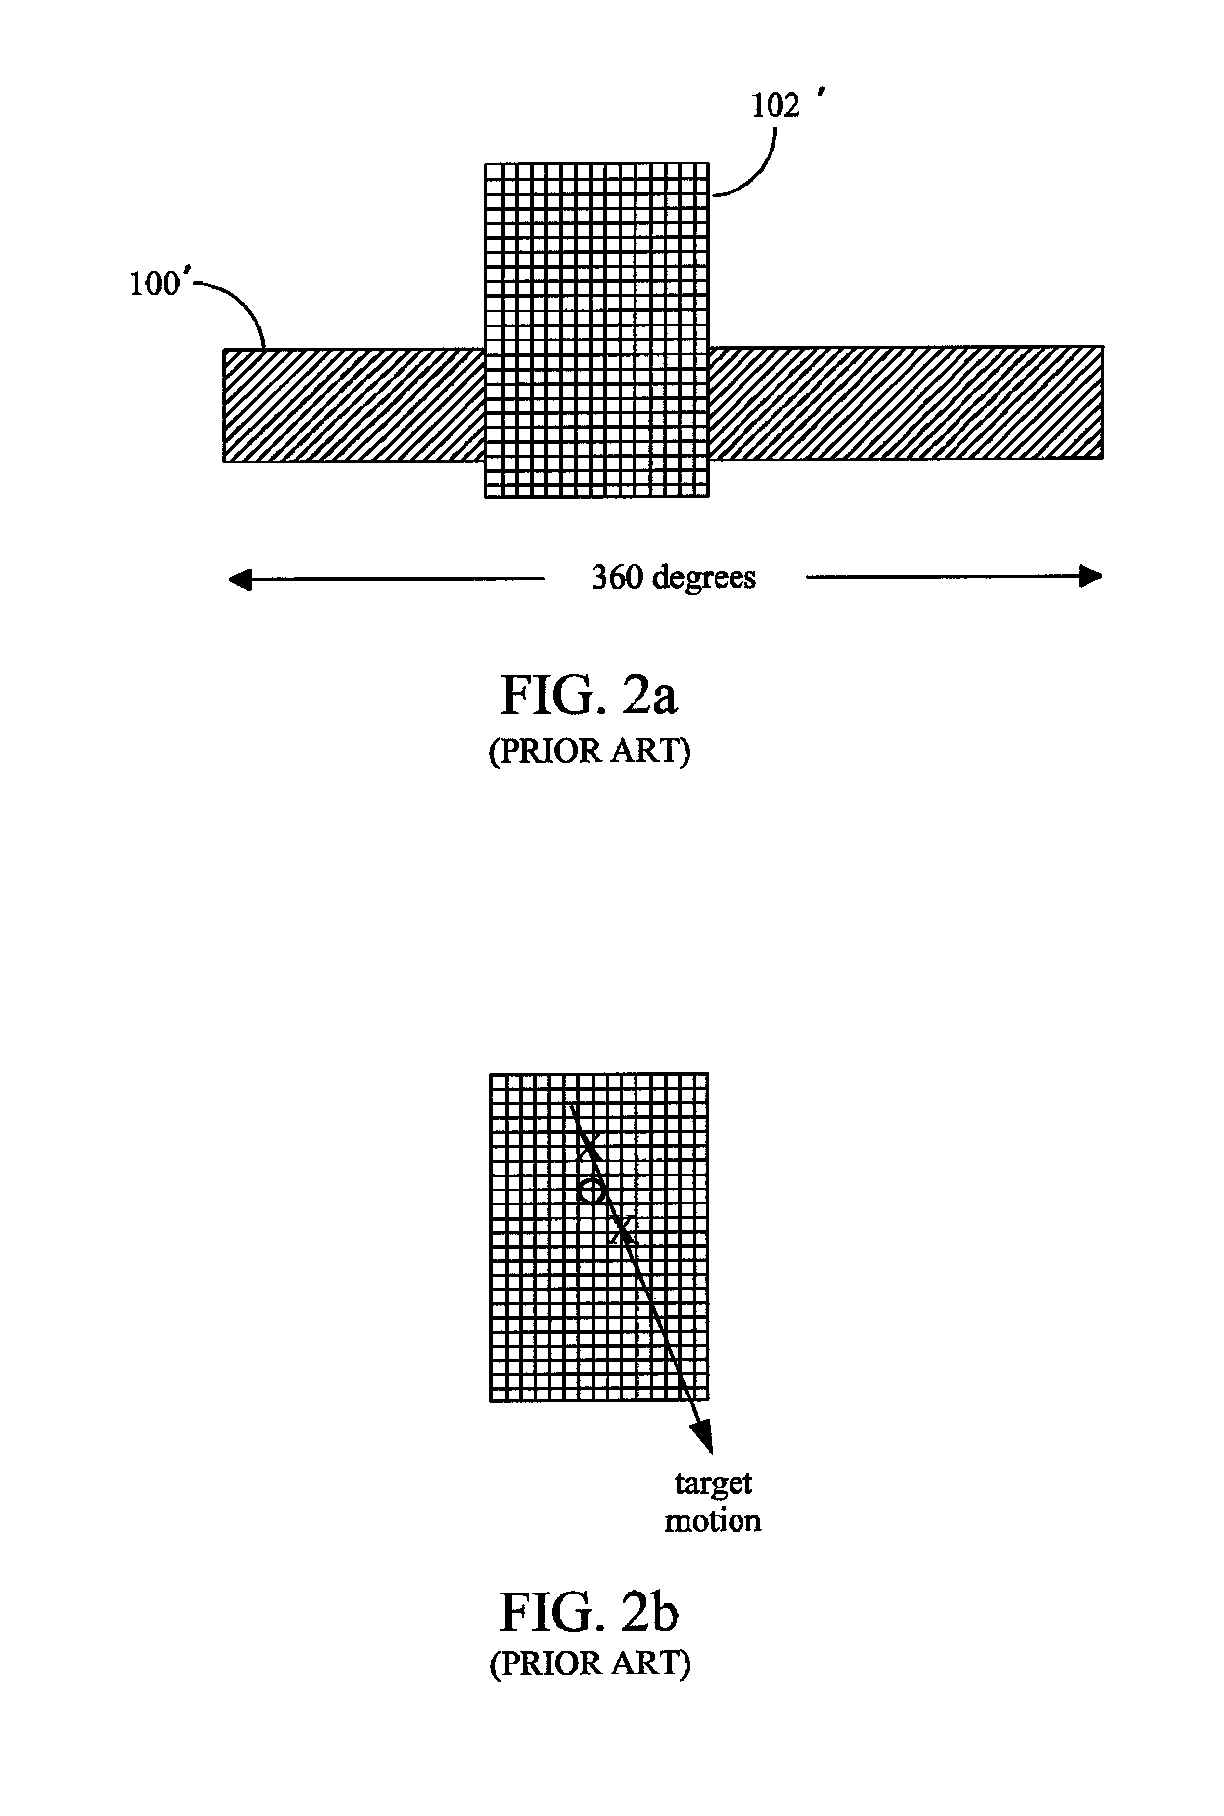 Single scan track initiation for radars having rotating, electronically scanned antennas